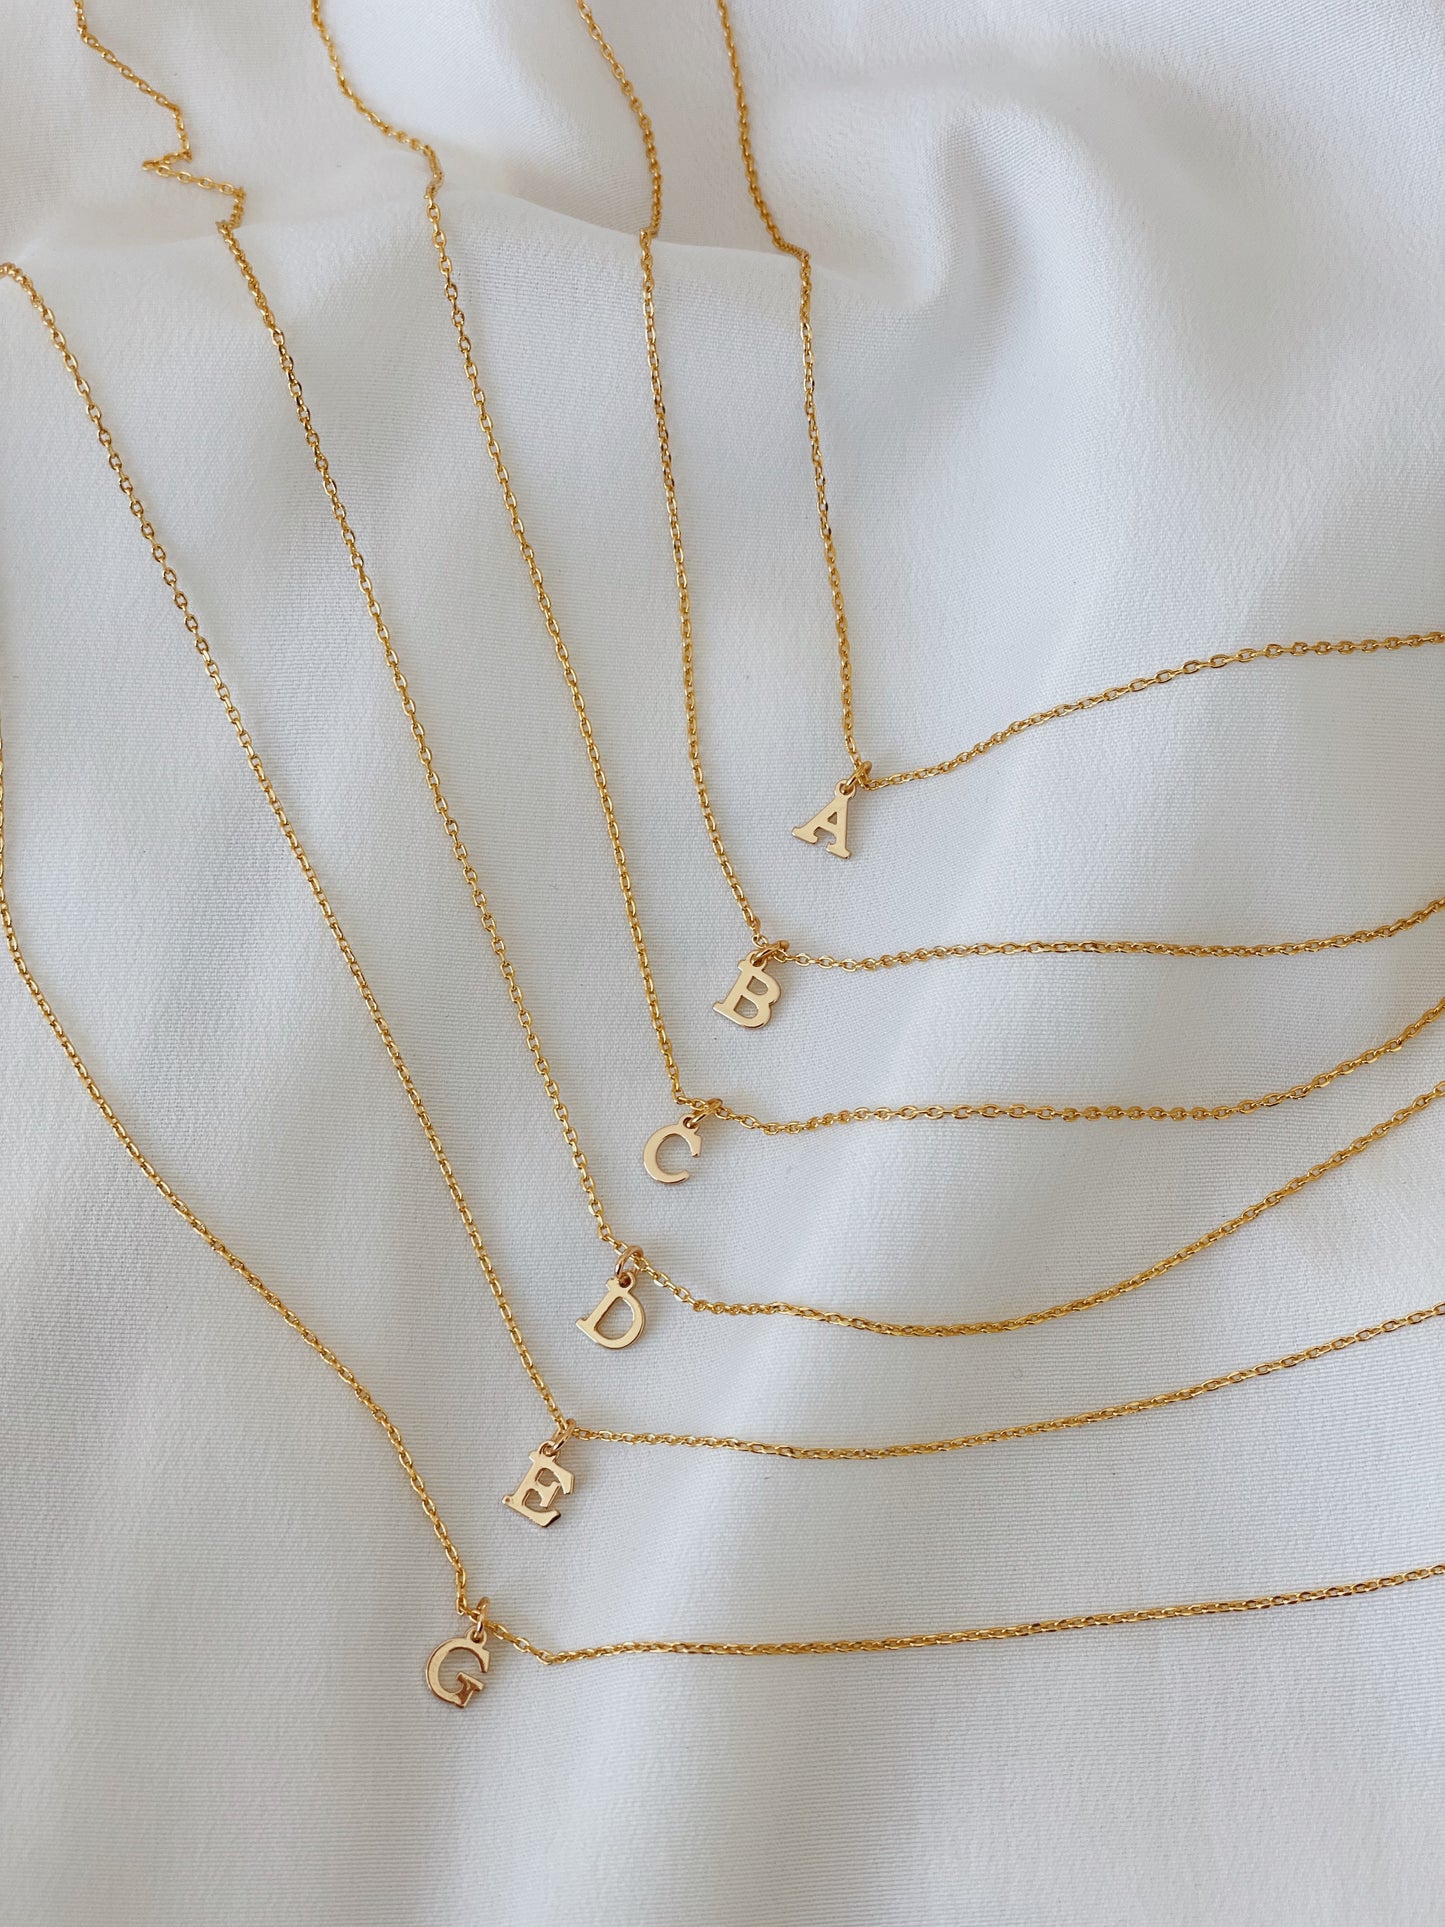 Dainty Initials Necklace